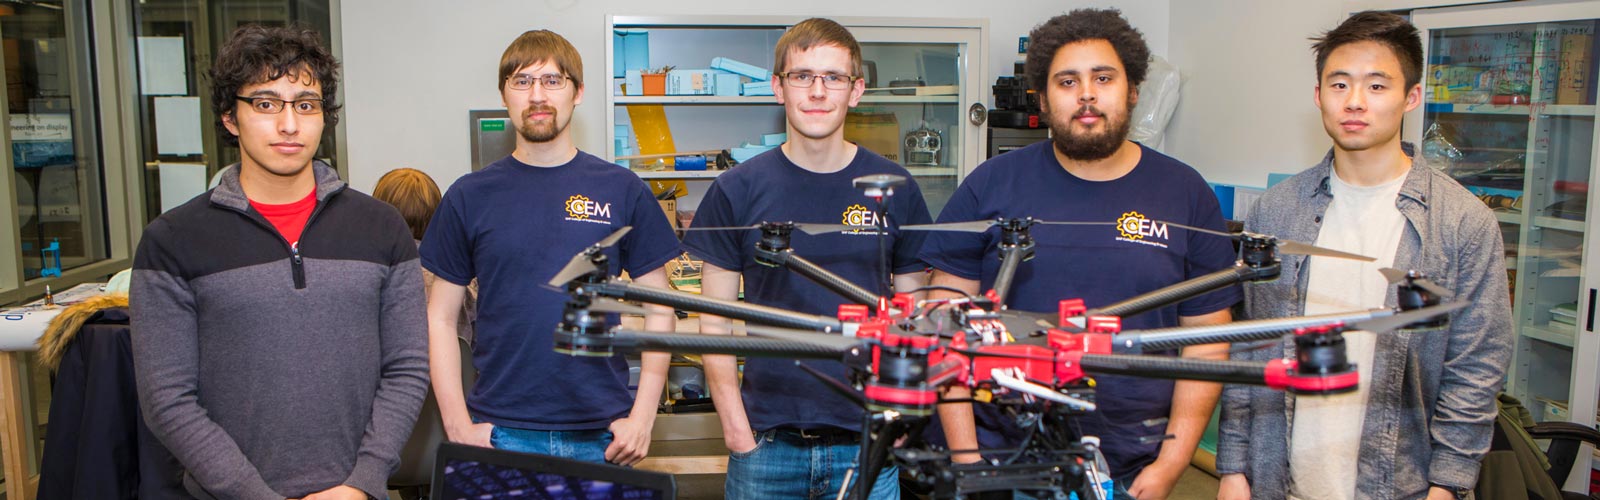 Students posing with their drone 